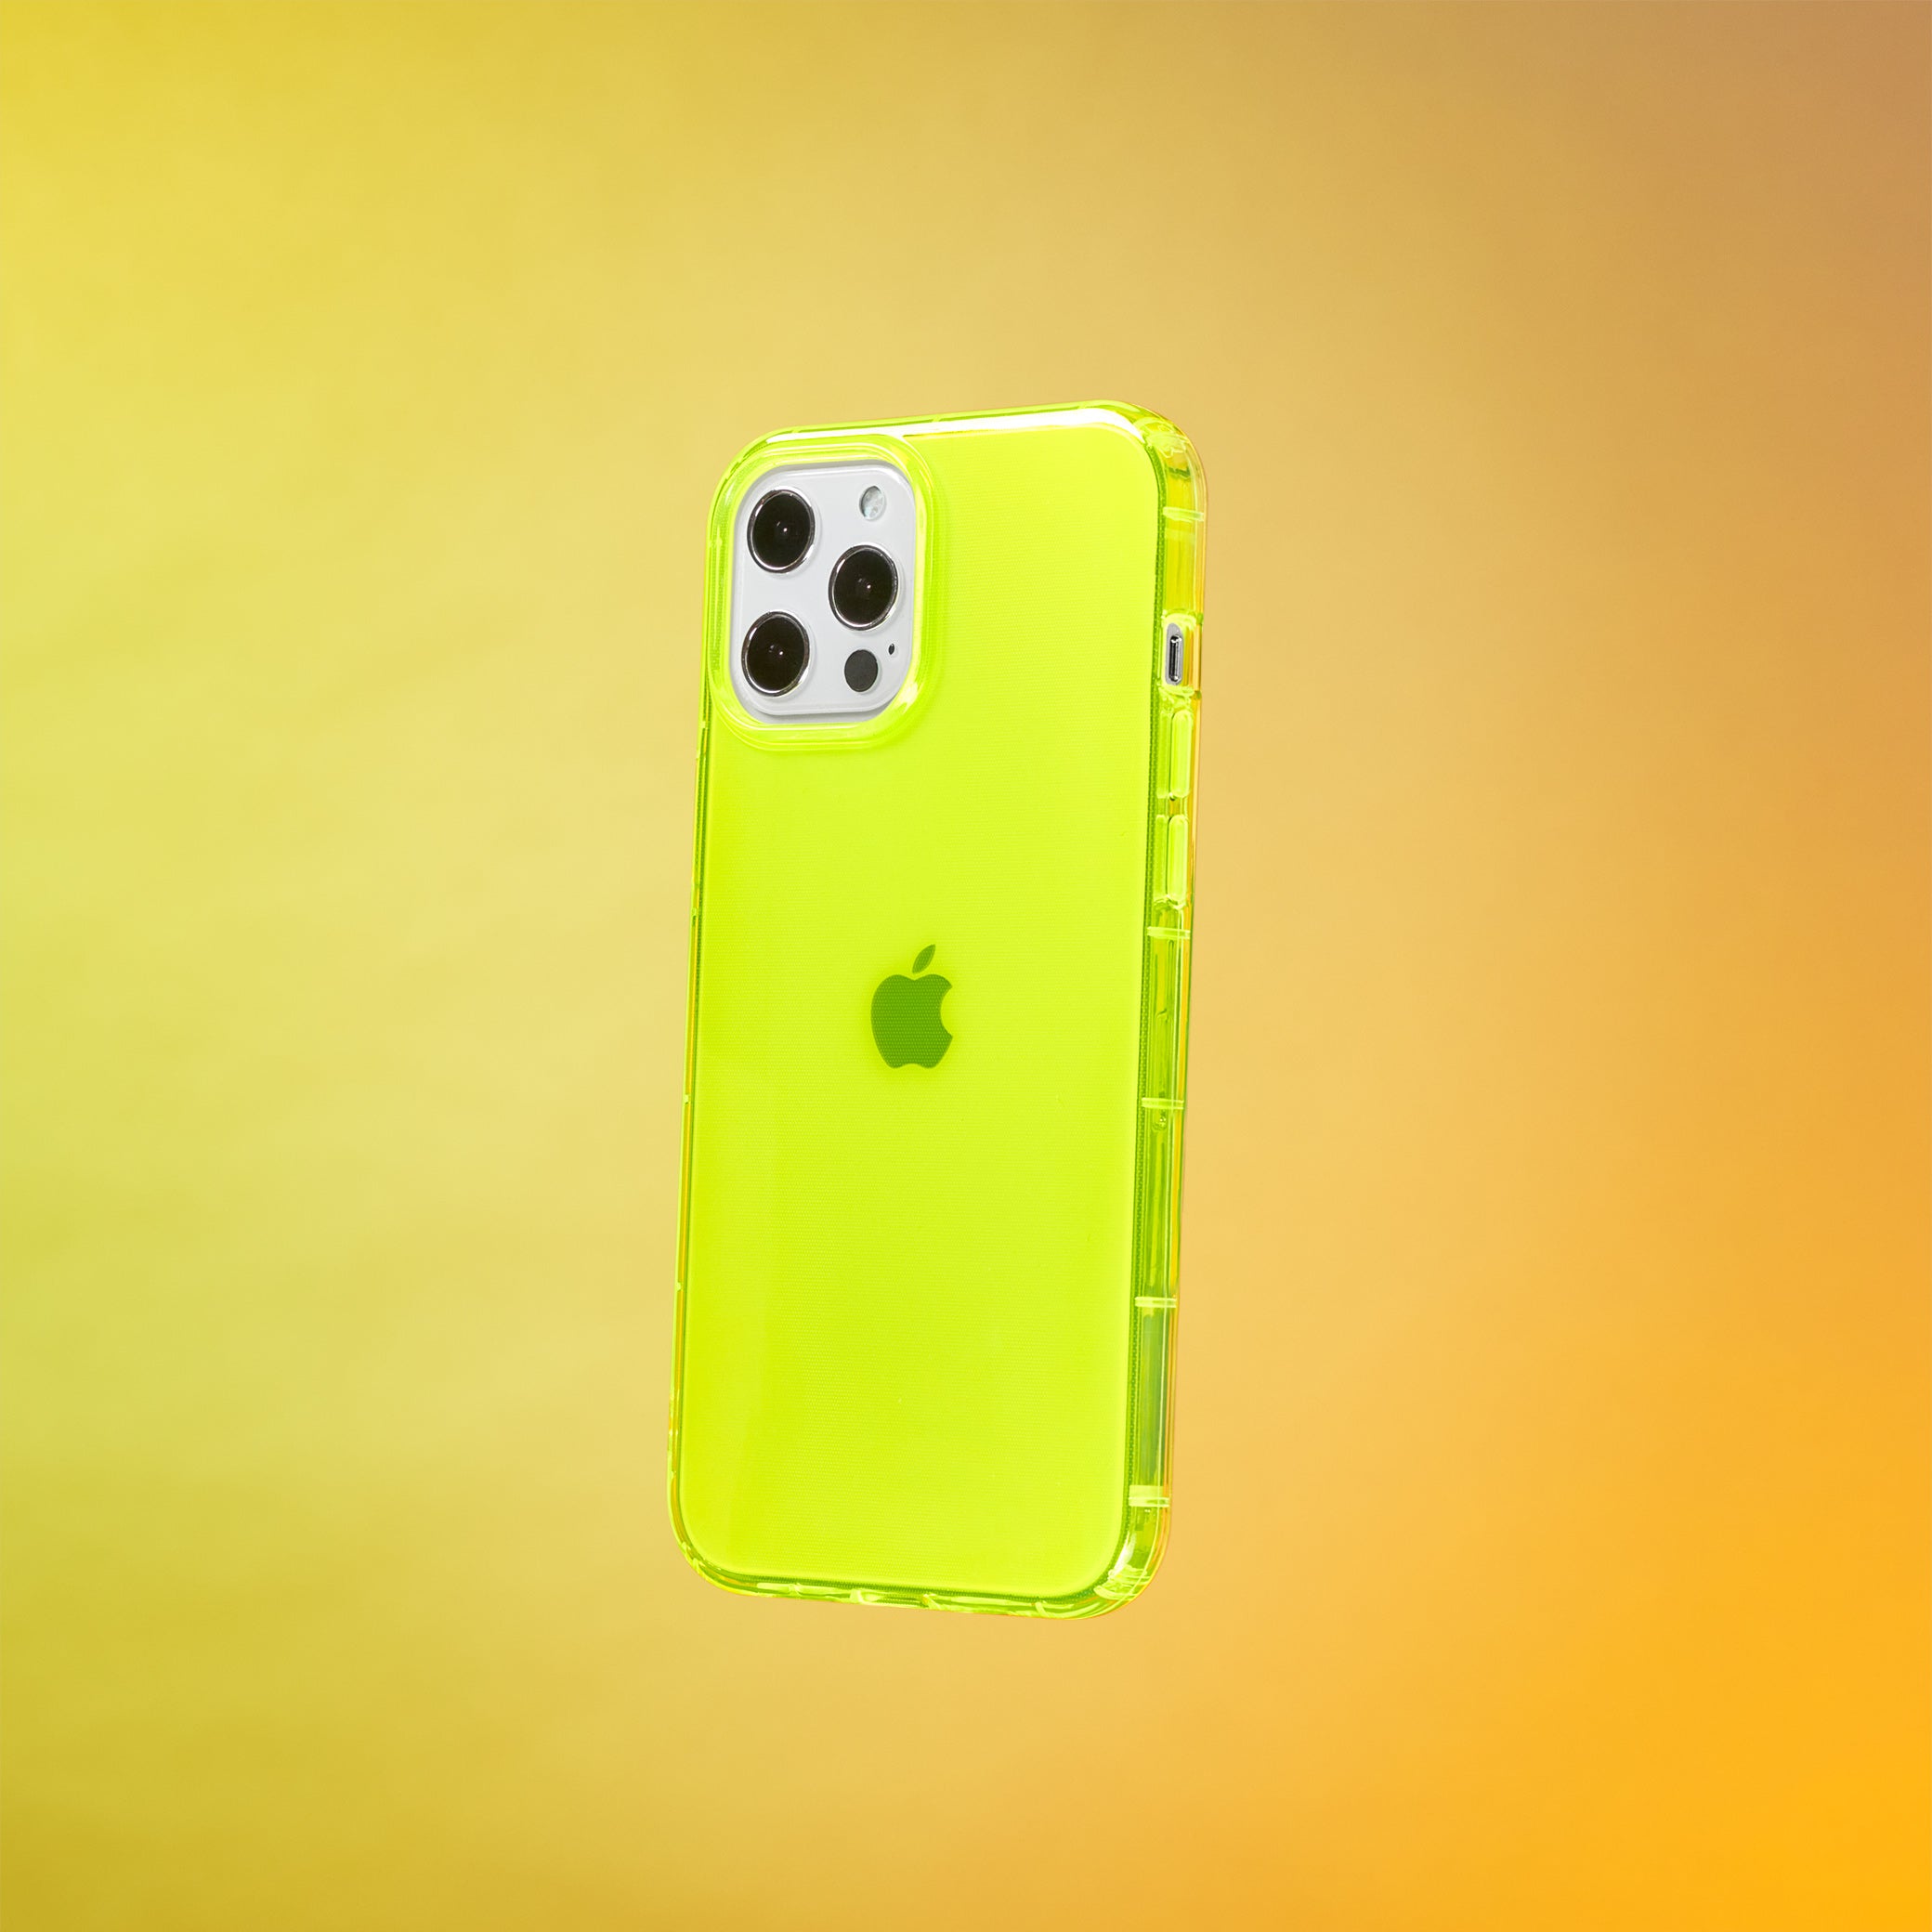 Highlighter Case for iPhone 12 Pro Max - Conspicuous Neon Yellow